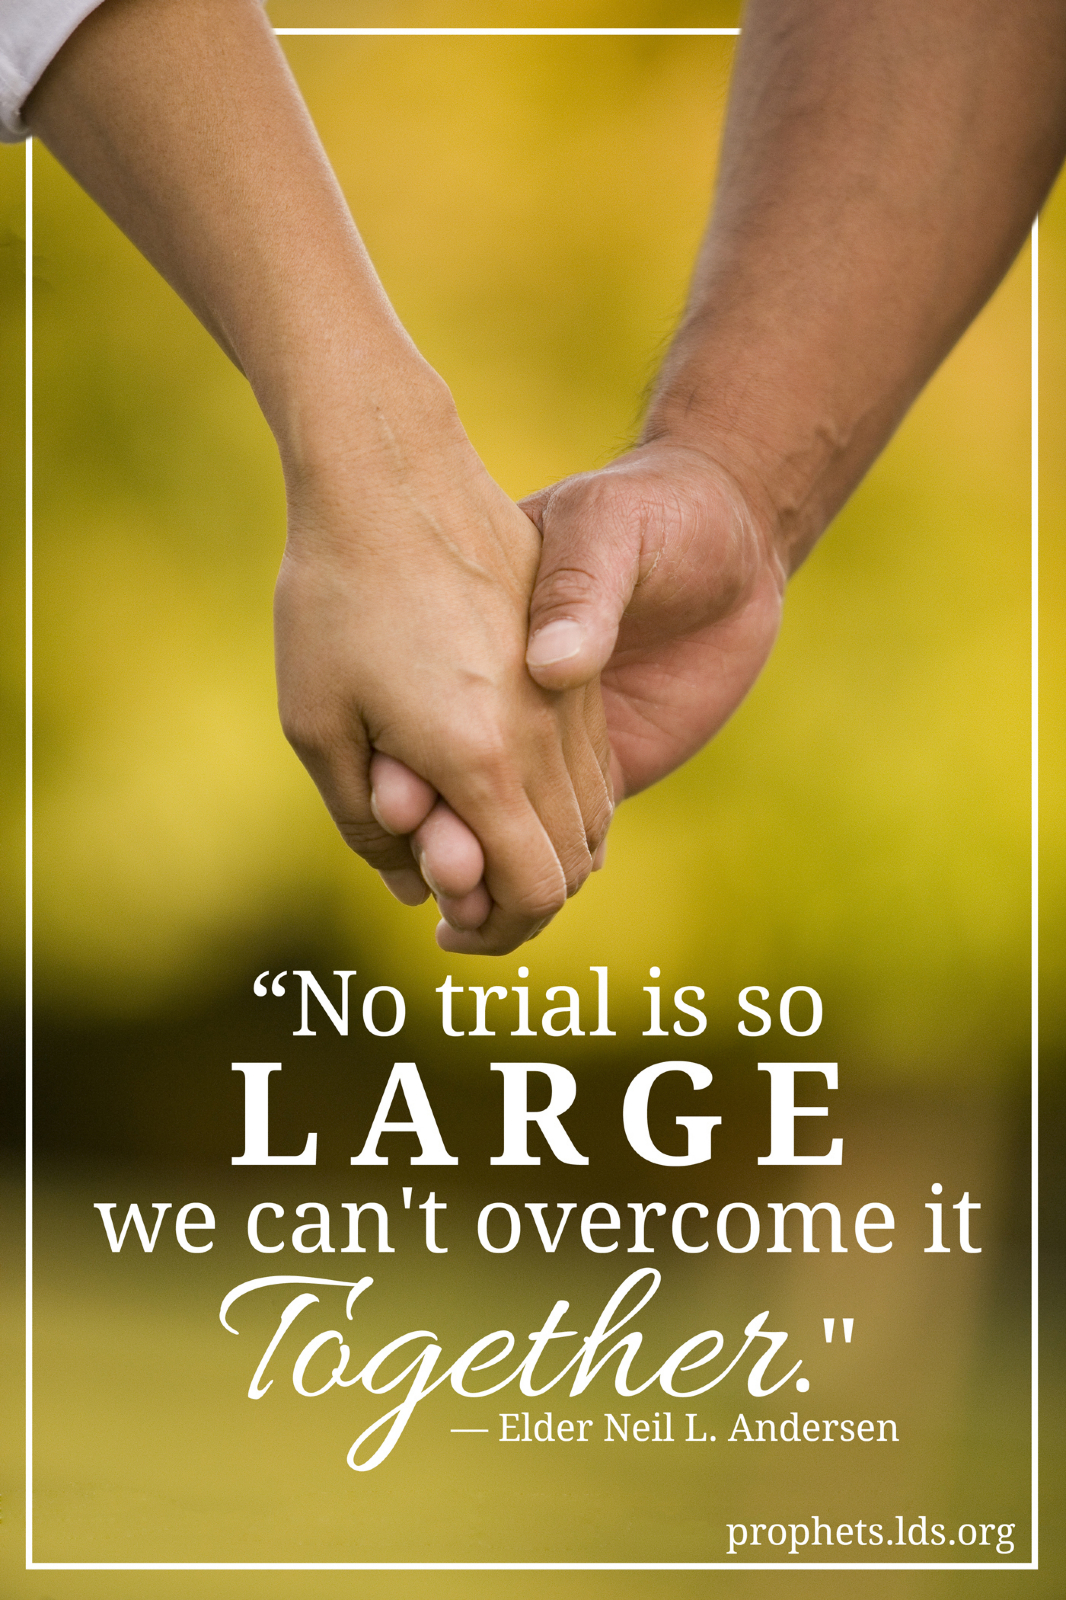 Quotes About Overcoming Trials. QuotesGram